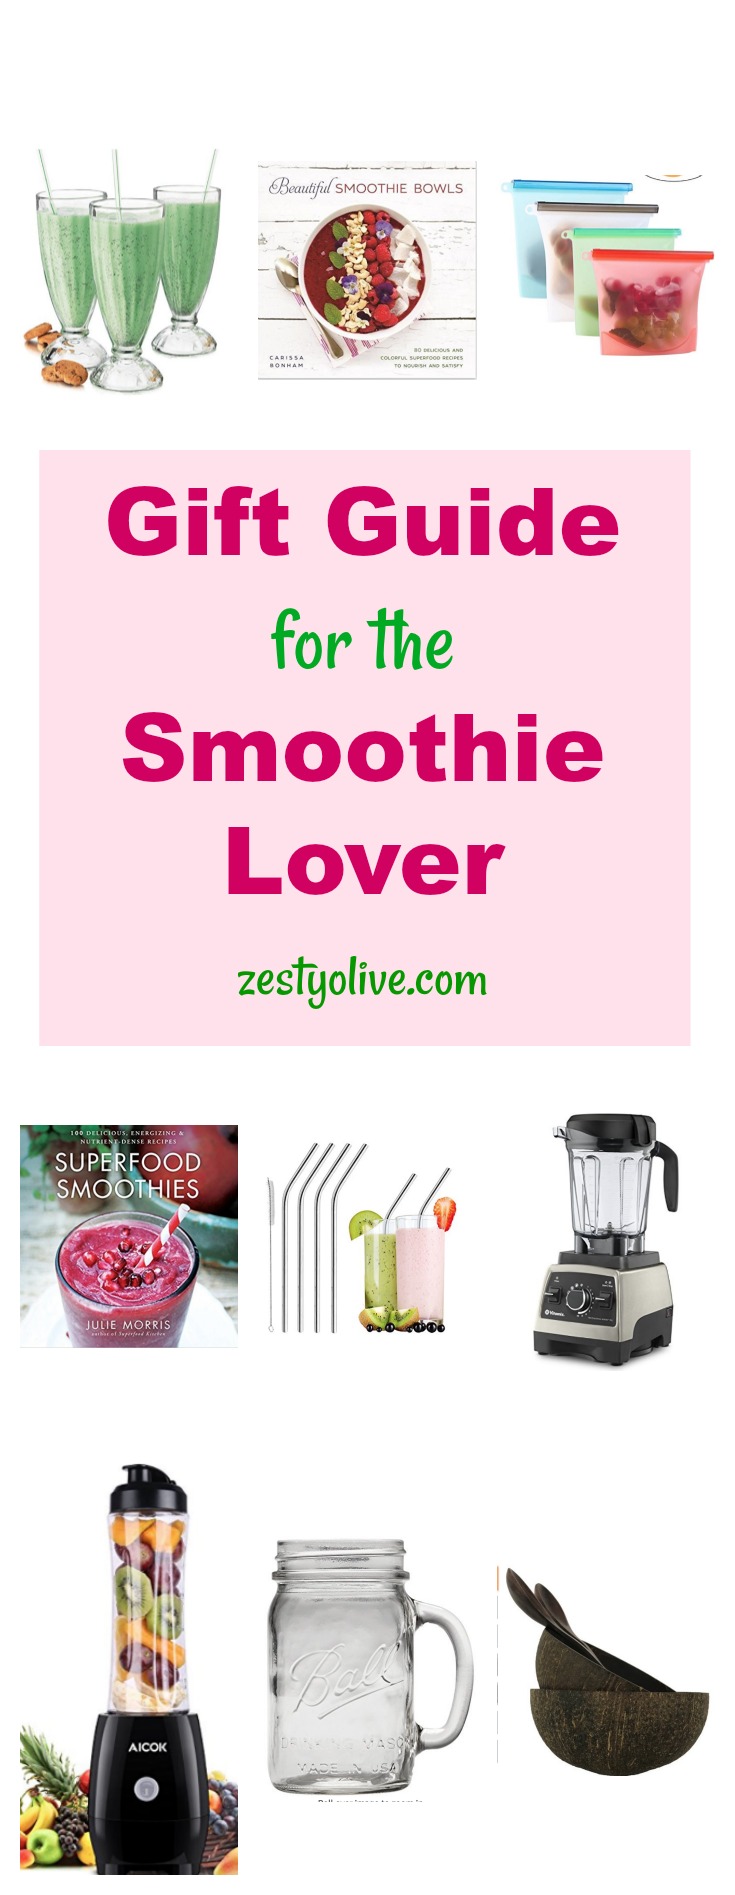 http://zestyolive.com/wp-content/uploads/2017/12/gift-guide-smoothie-lover-2.jpg